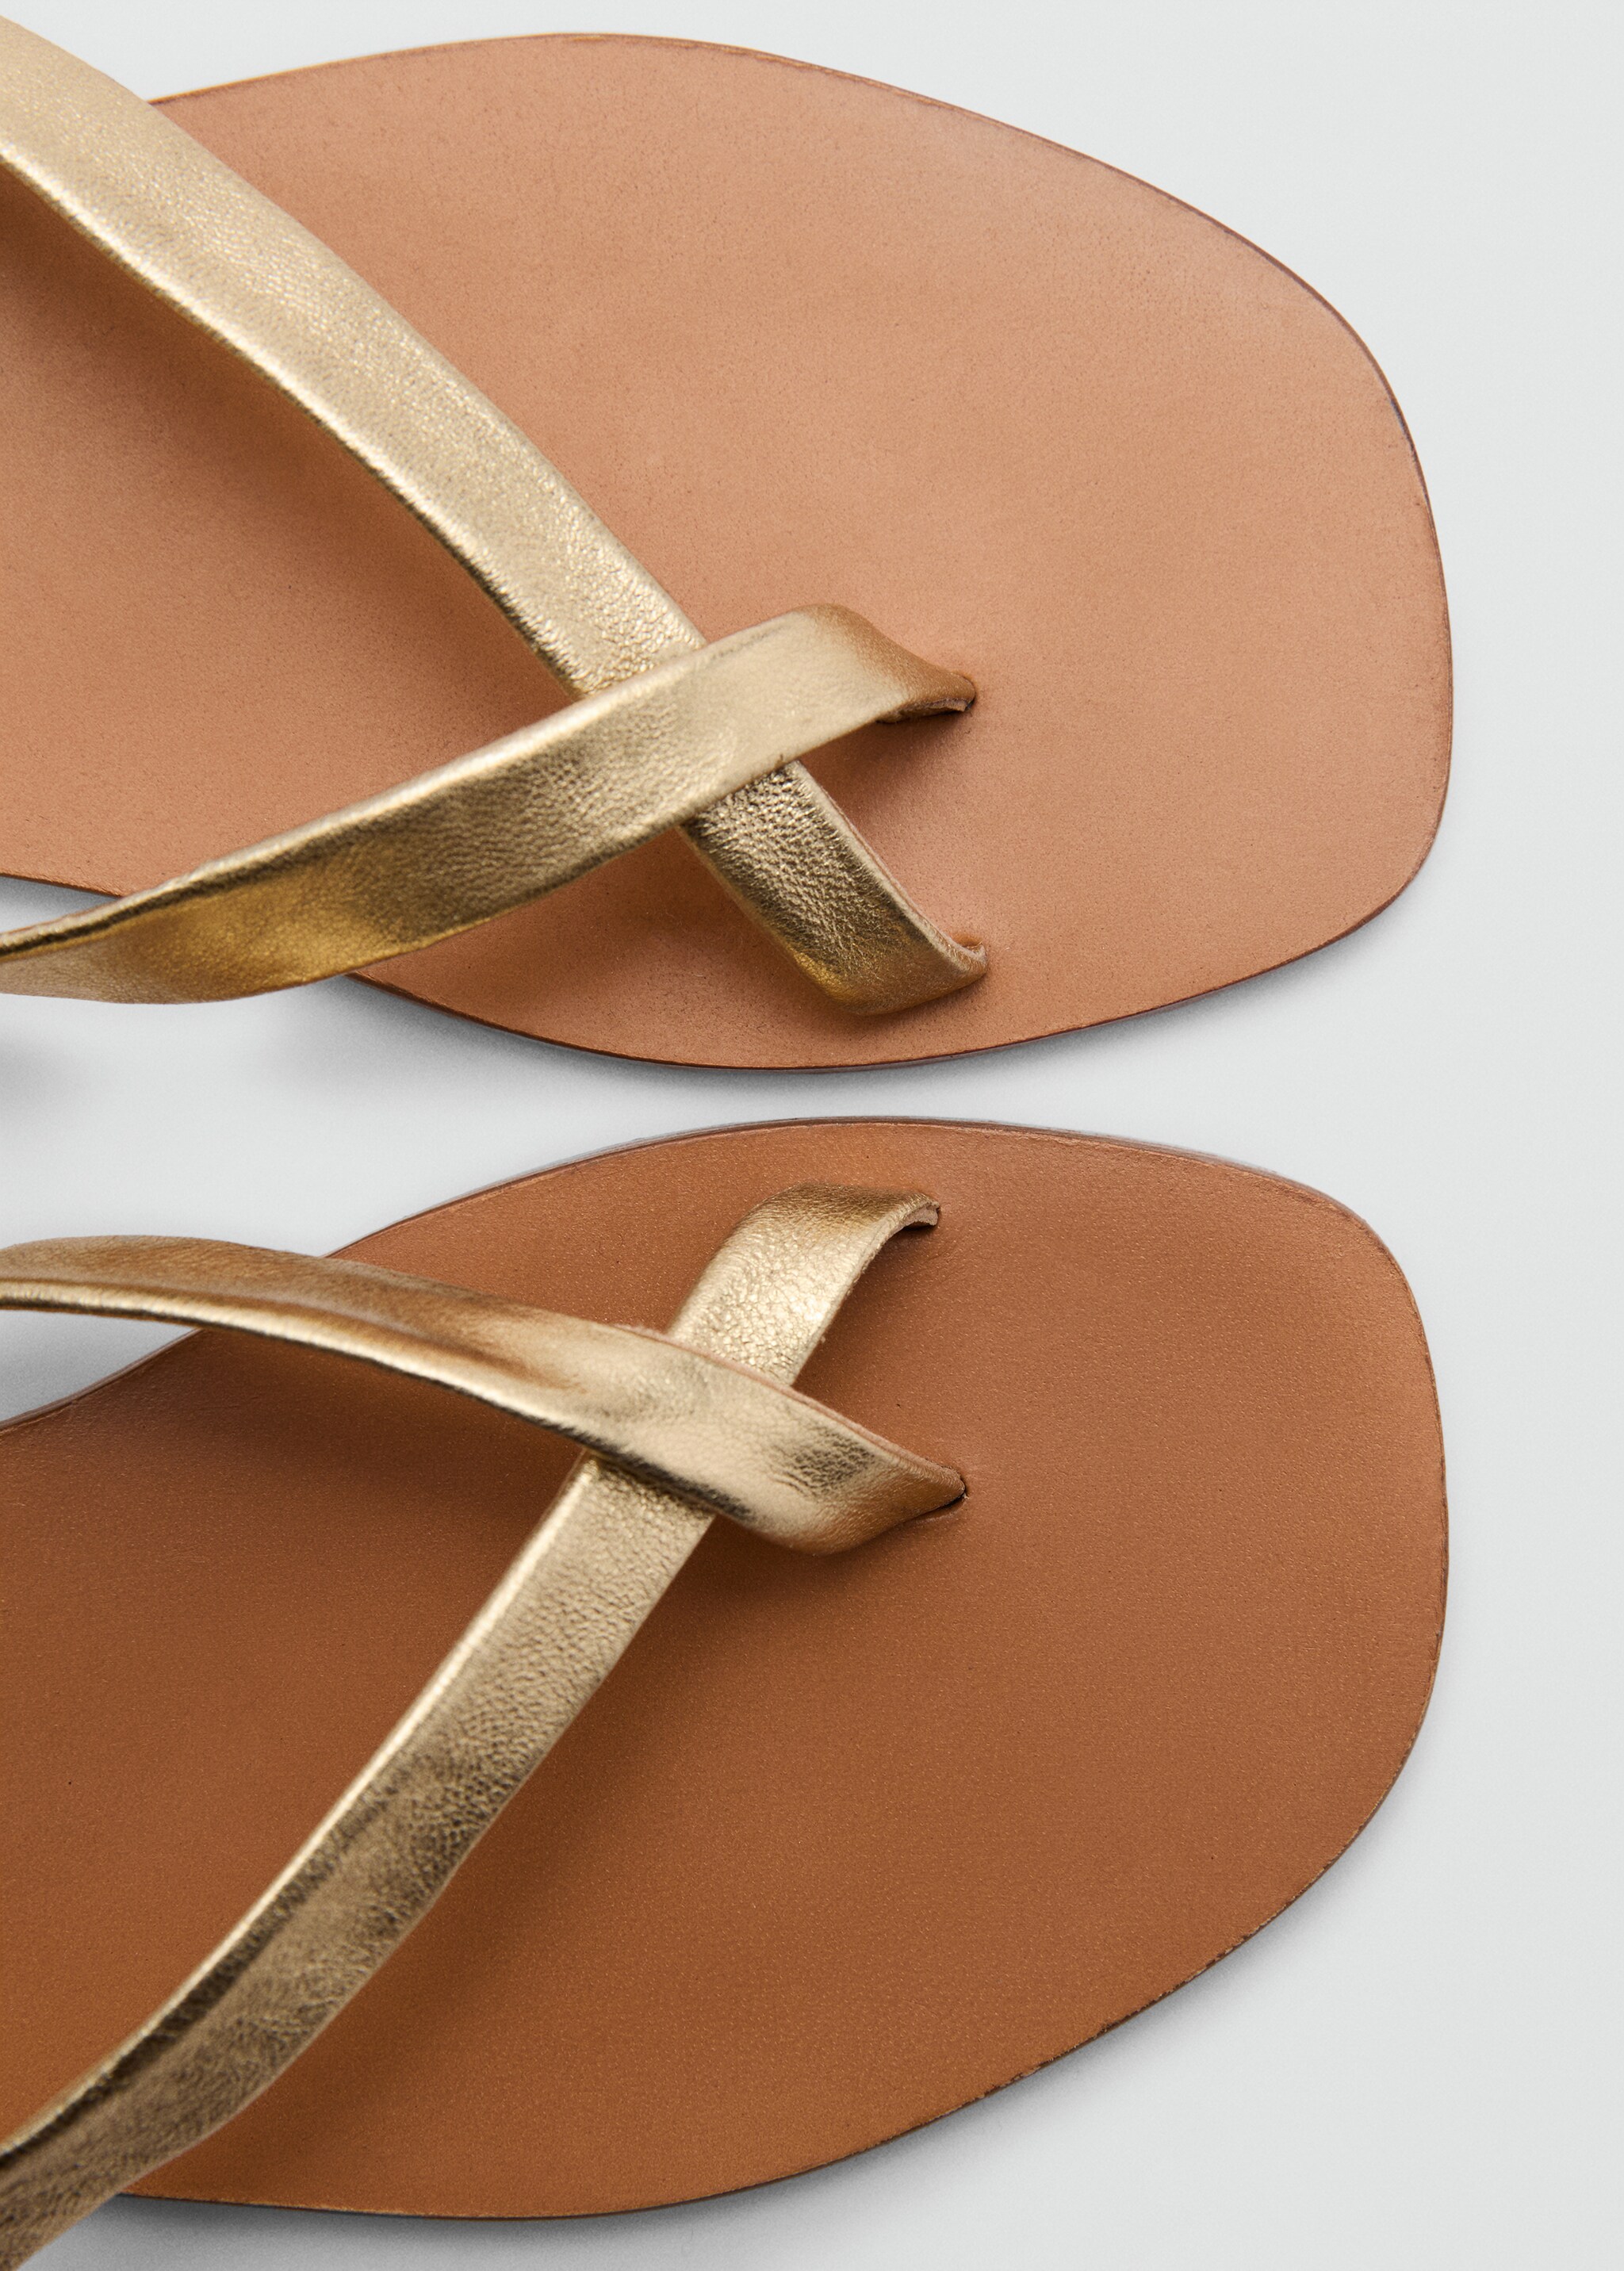 Leather straps sandals - Details of the article 2